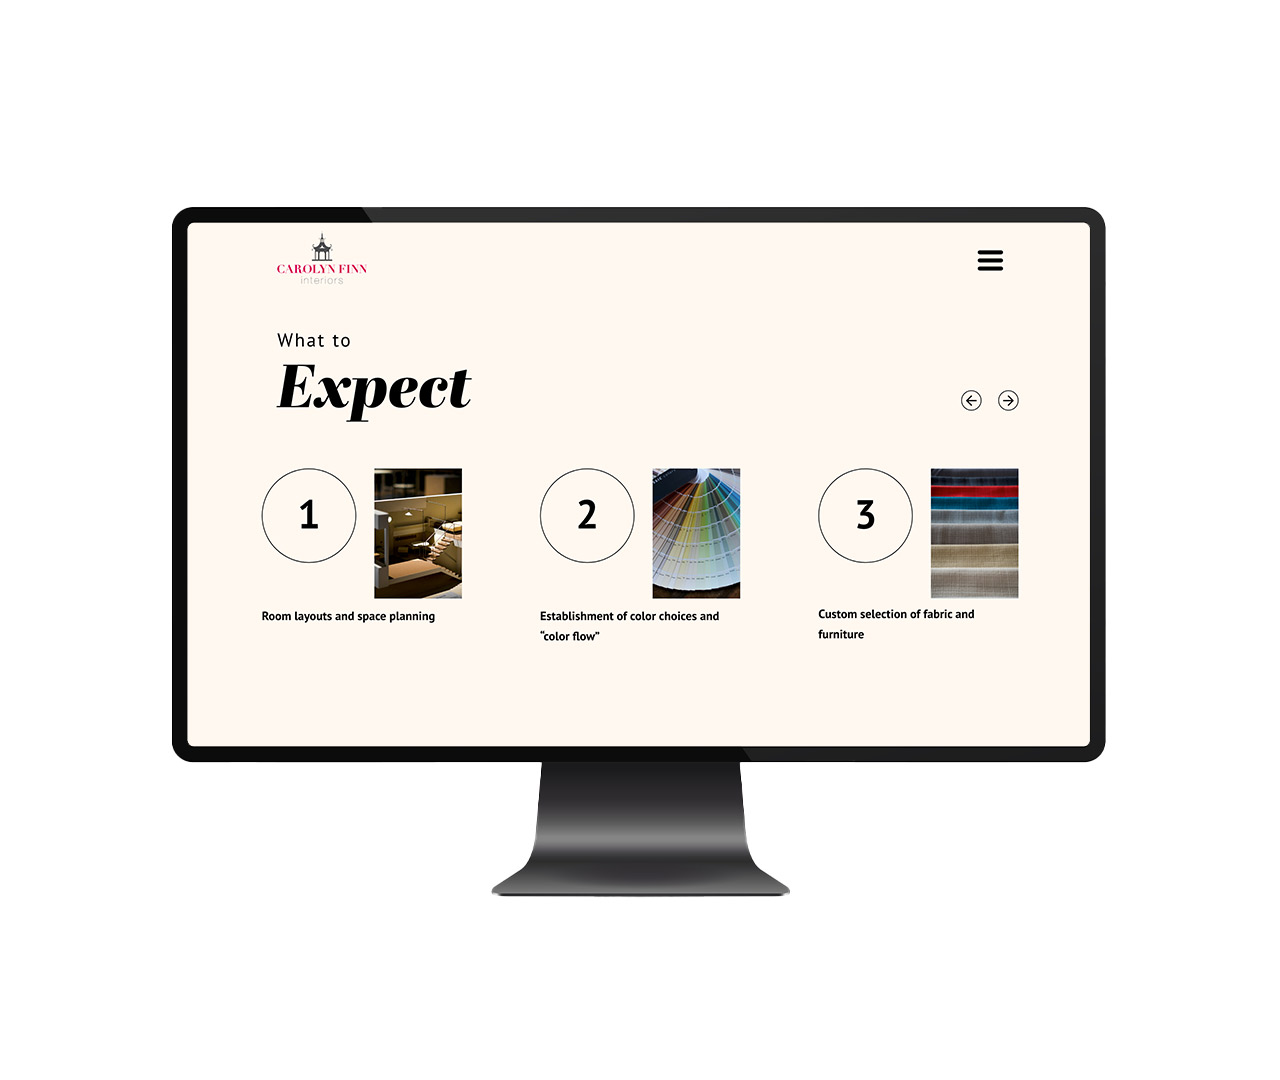 A desktop display screen featuring "What to Expect" and services provided.